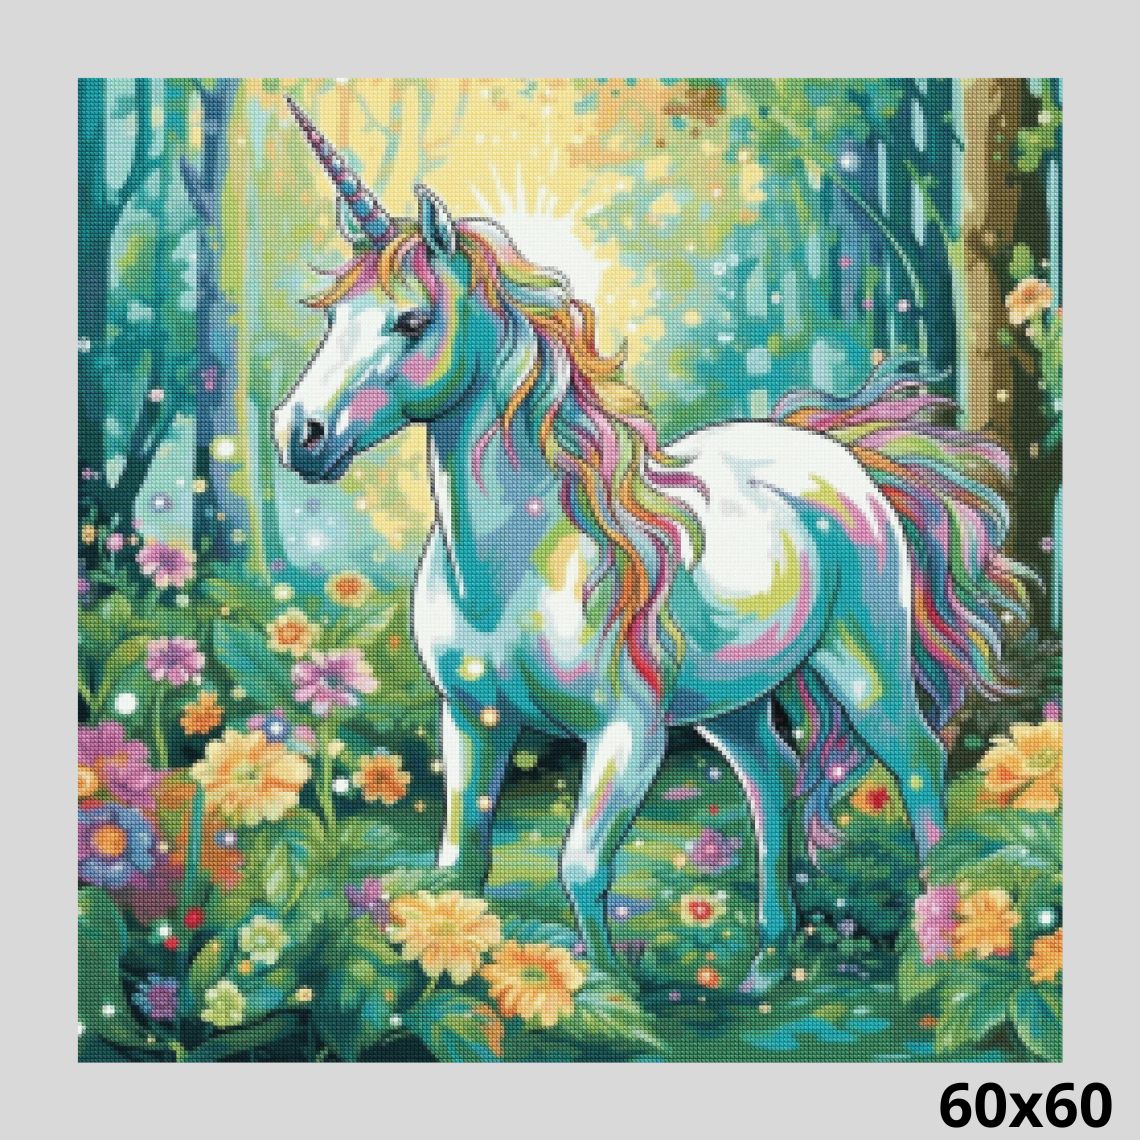 Diamond Painting Deutschland - Diamond Painting picture stretched on a  wooden stretcher, unicorn, round rhinestones diamonds, approx. 50x40cm,  partial picture